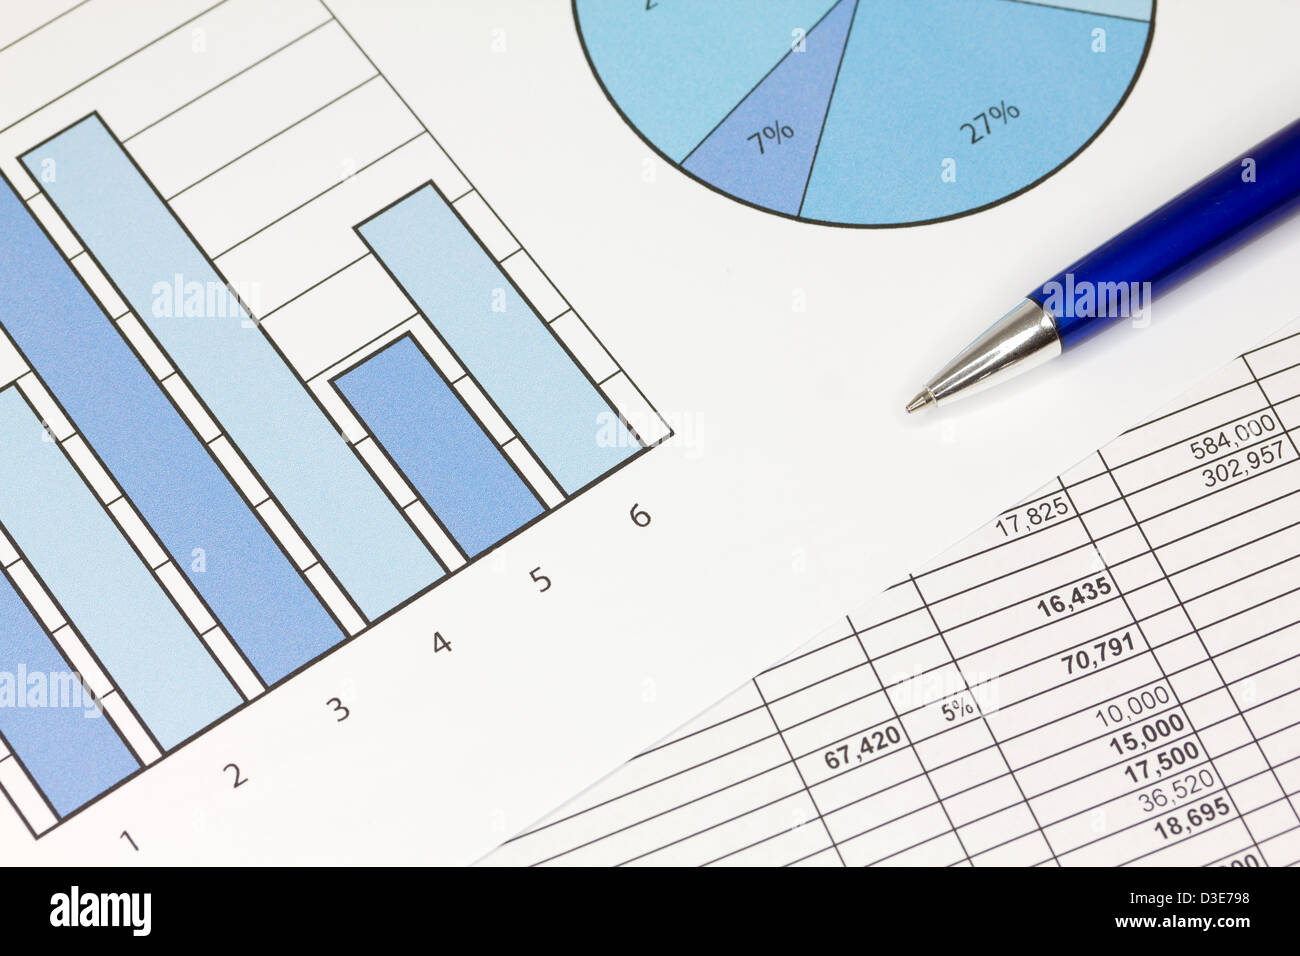 Graphs in Blue with Spreadsheet and Pen Stock Photo